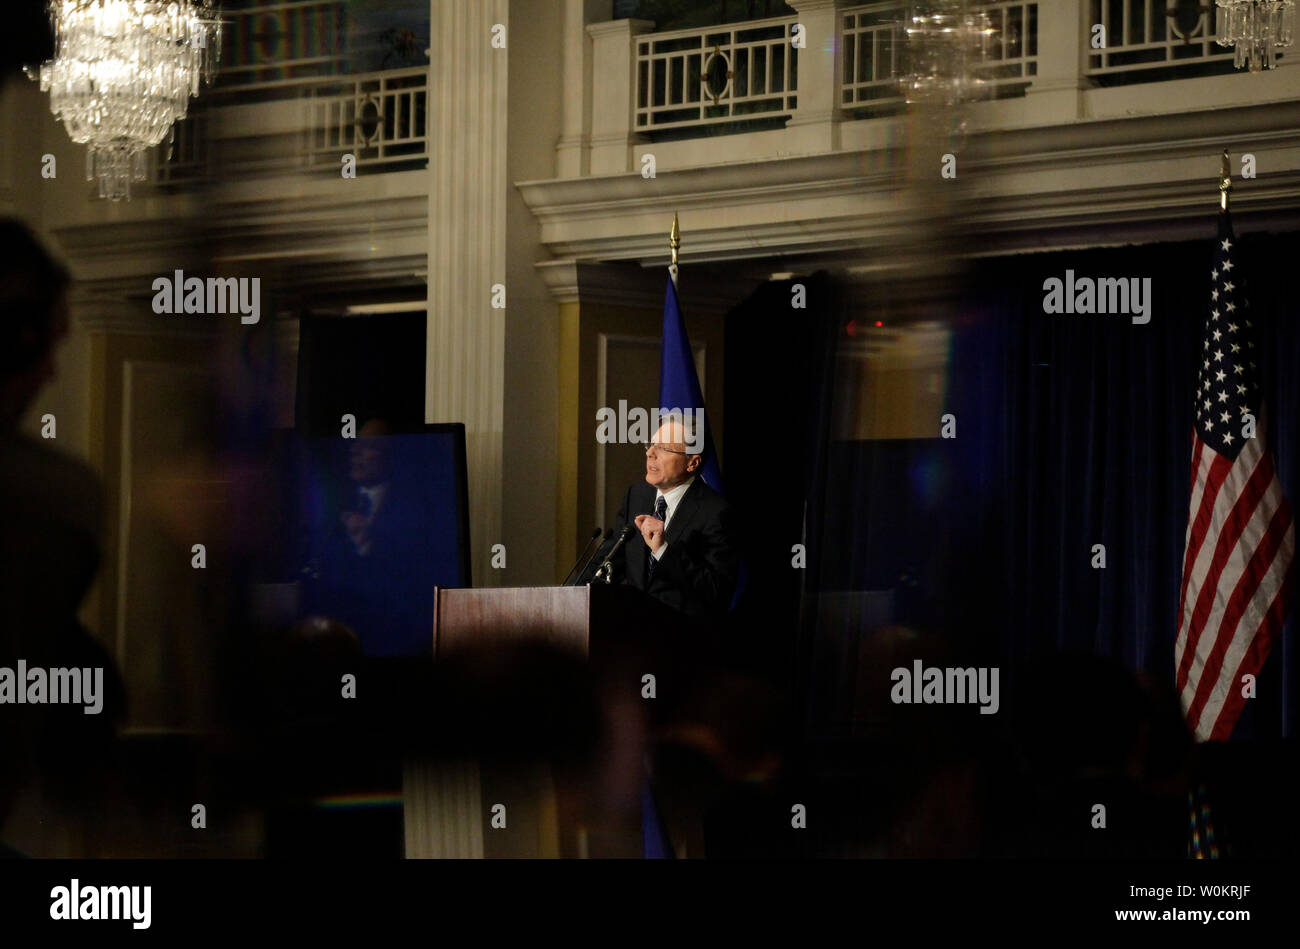 National Rifle Association (NRA) CEO Wayne LaPierre is reflected in a mirror while he speaks during a press conference in Washington, DC, December 21, 2012.   Today marks one week since the Sandy Hook elementary  school masacre in Newtown, Connecticut where 20 children and 6 adults were killed in one of the deadliest school shootings in U.S. history.  UPI/Molly Riley Stock Photo